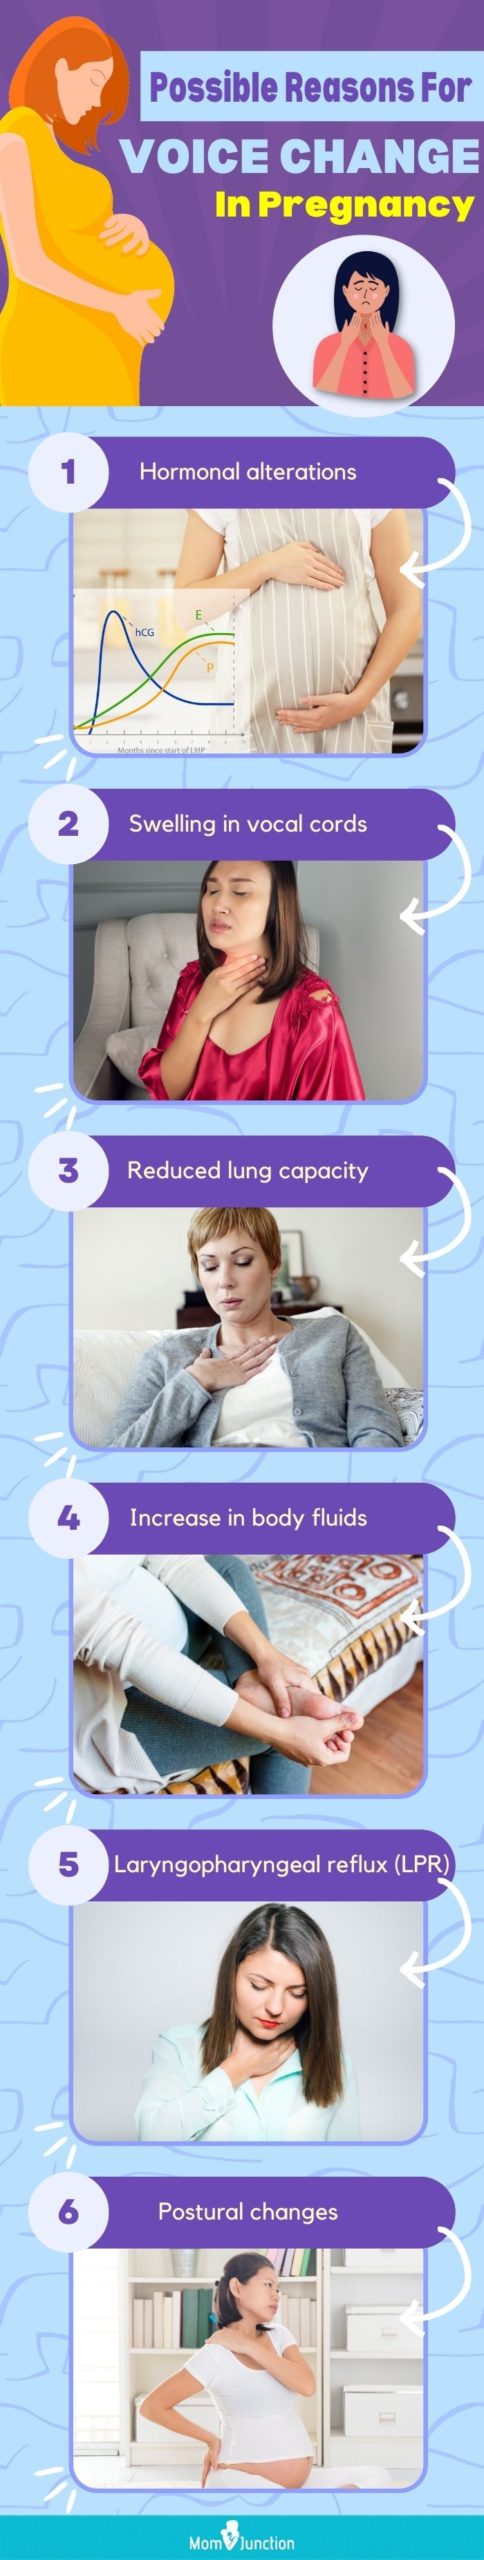 possible reasons for voice change in pregnancy (infographic)